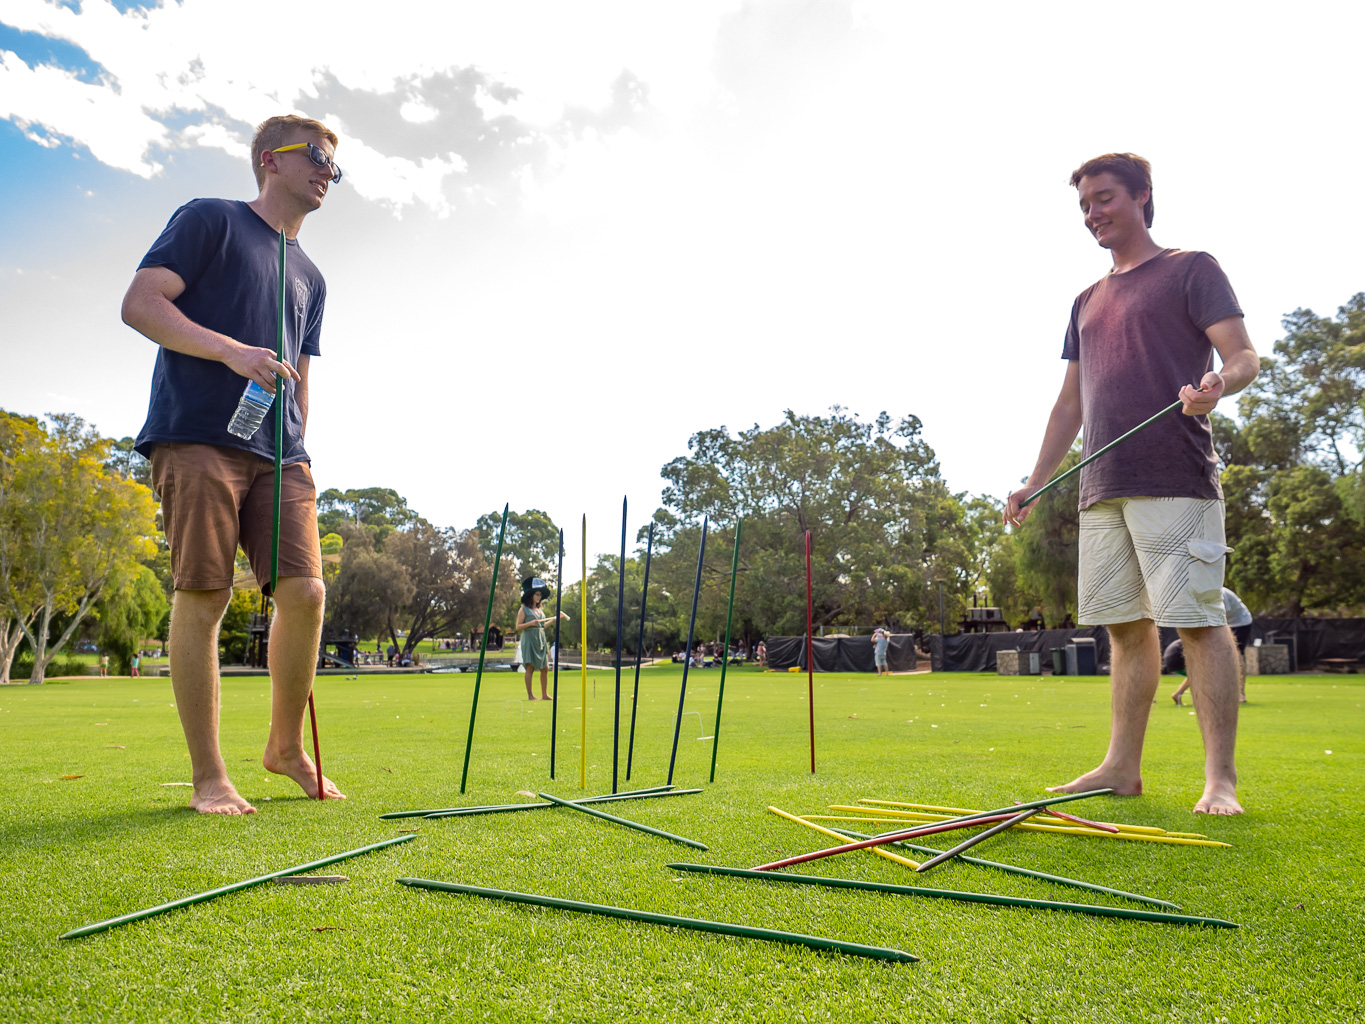 High Tea and Lawn Games